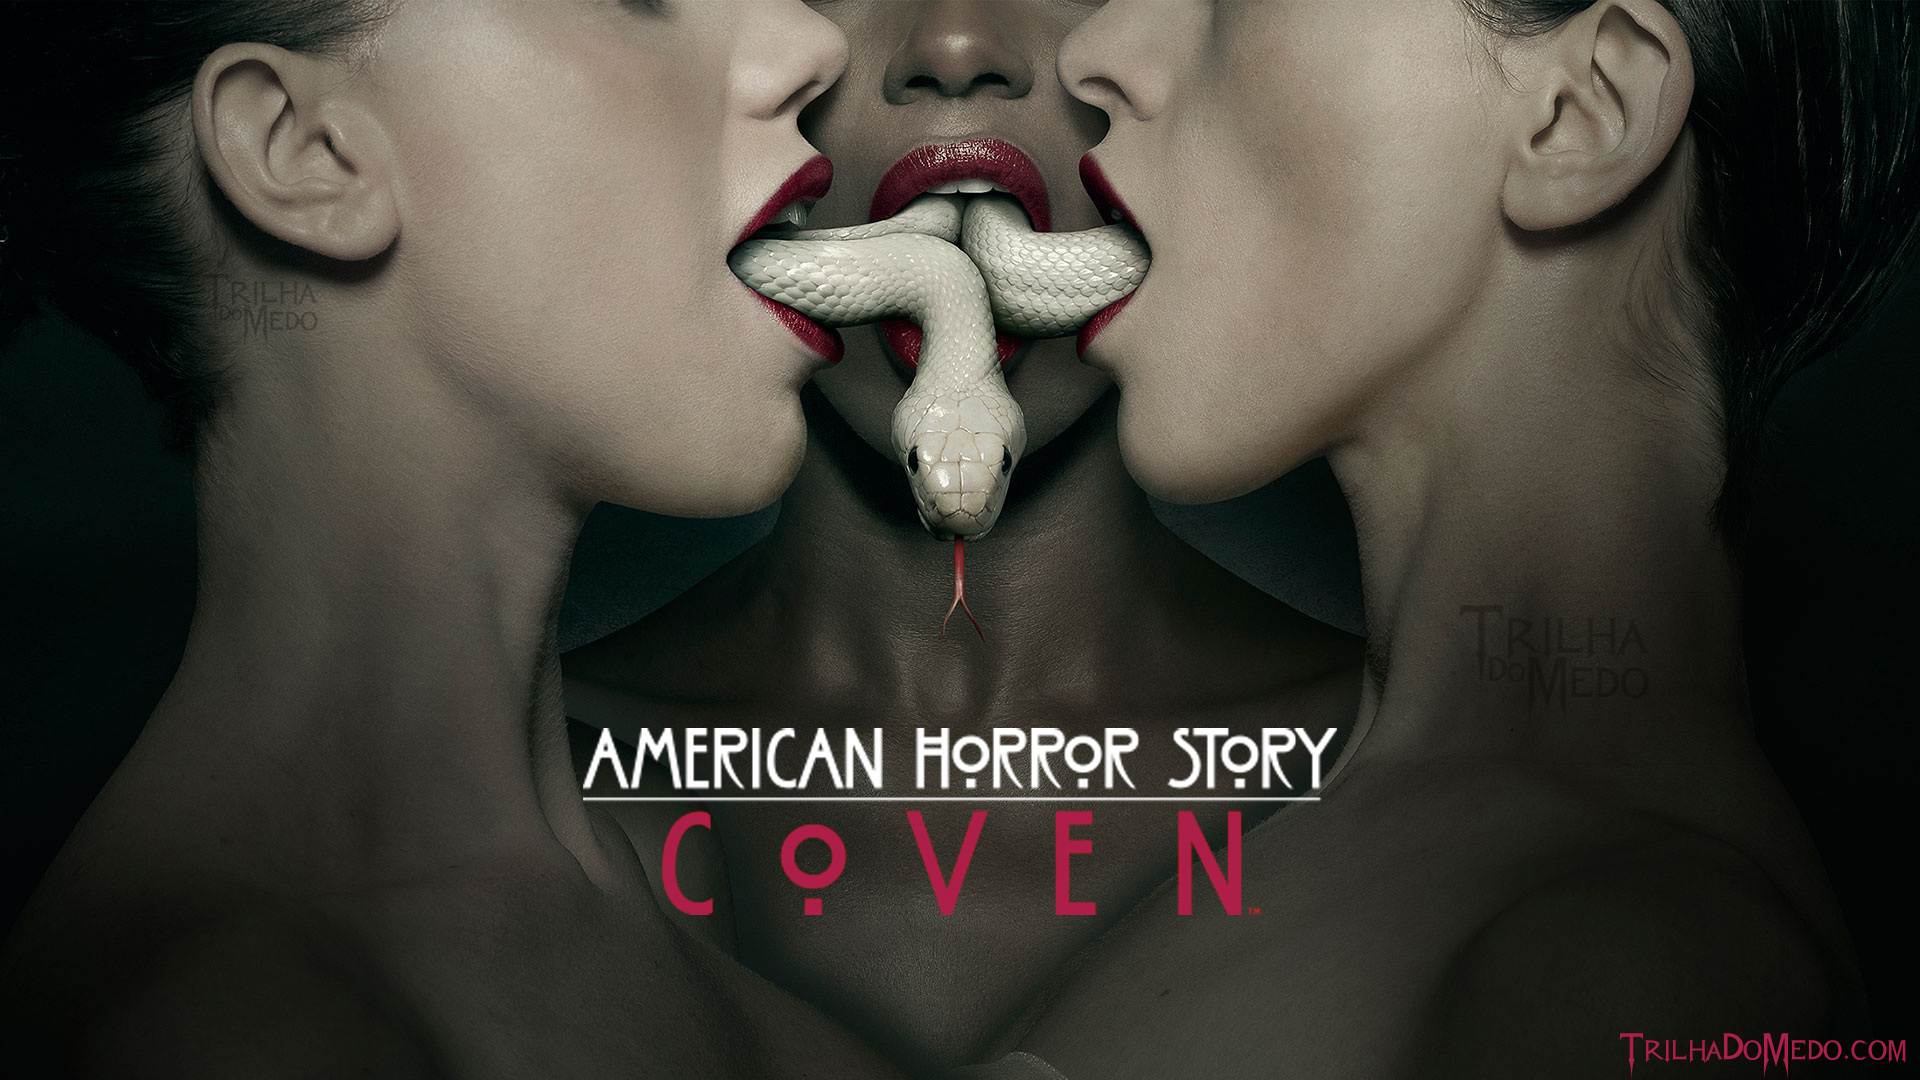 Wallpapers Exclusivos   American Horror Story Coven   Trilha Do Medo 1920x1080